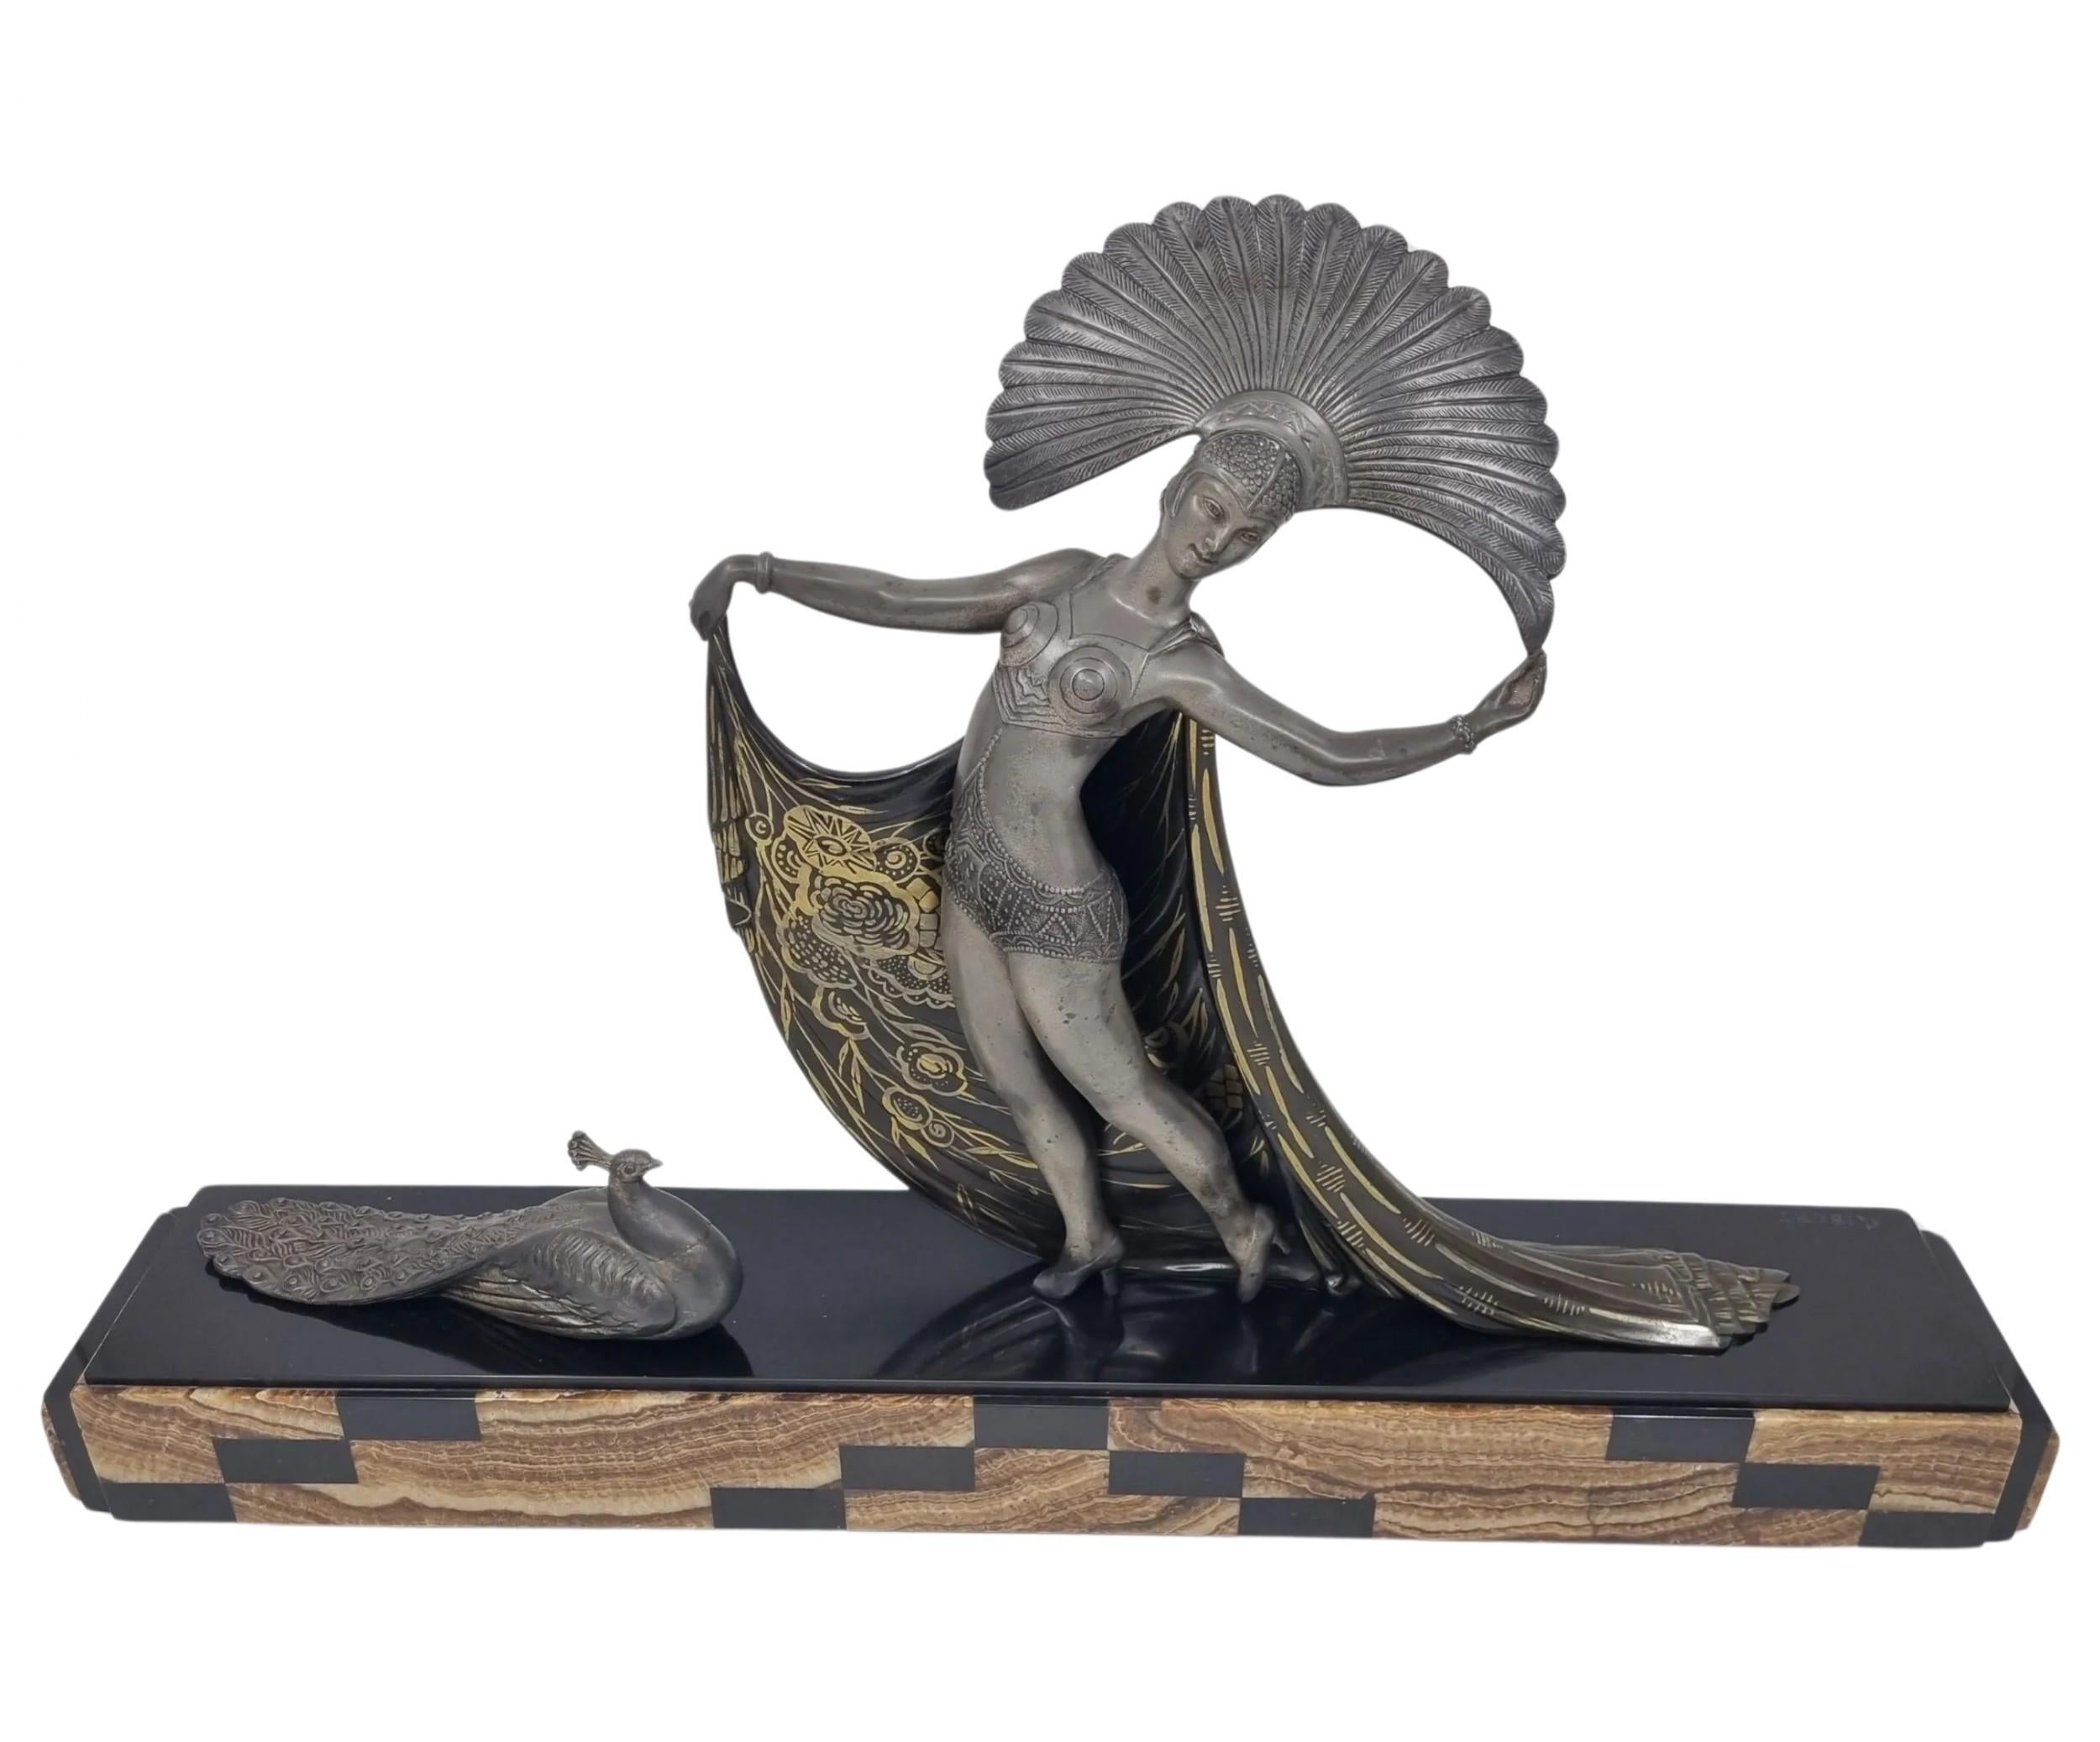 Art Deco Sculpture Cabaret Dancer with a Peacock by Gibert For Sale 3